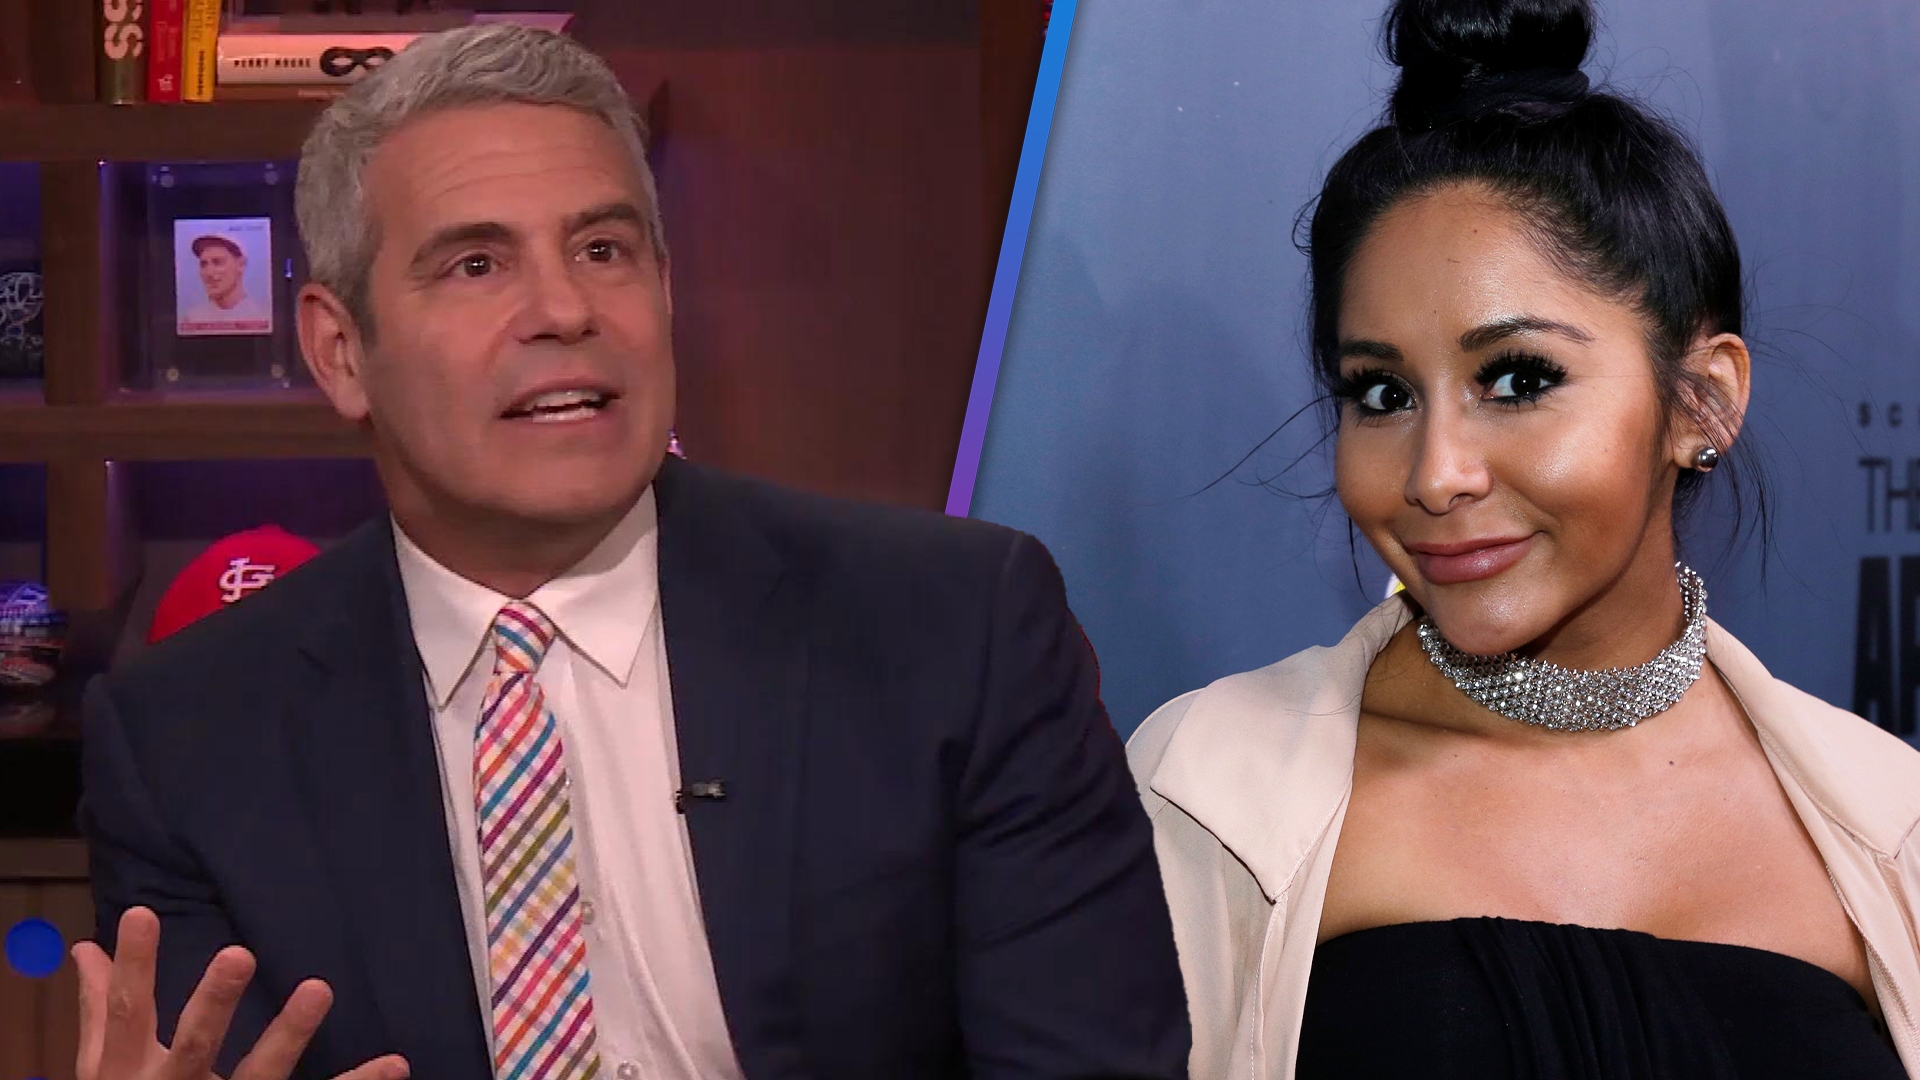 Oops! Andy Cohen Accidentally Revealed Kyle Richards' Breast Reduction On  WWHL - WATCH! - Perez Hilton